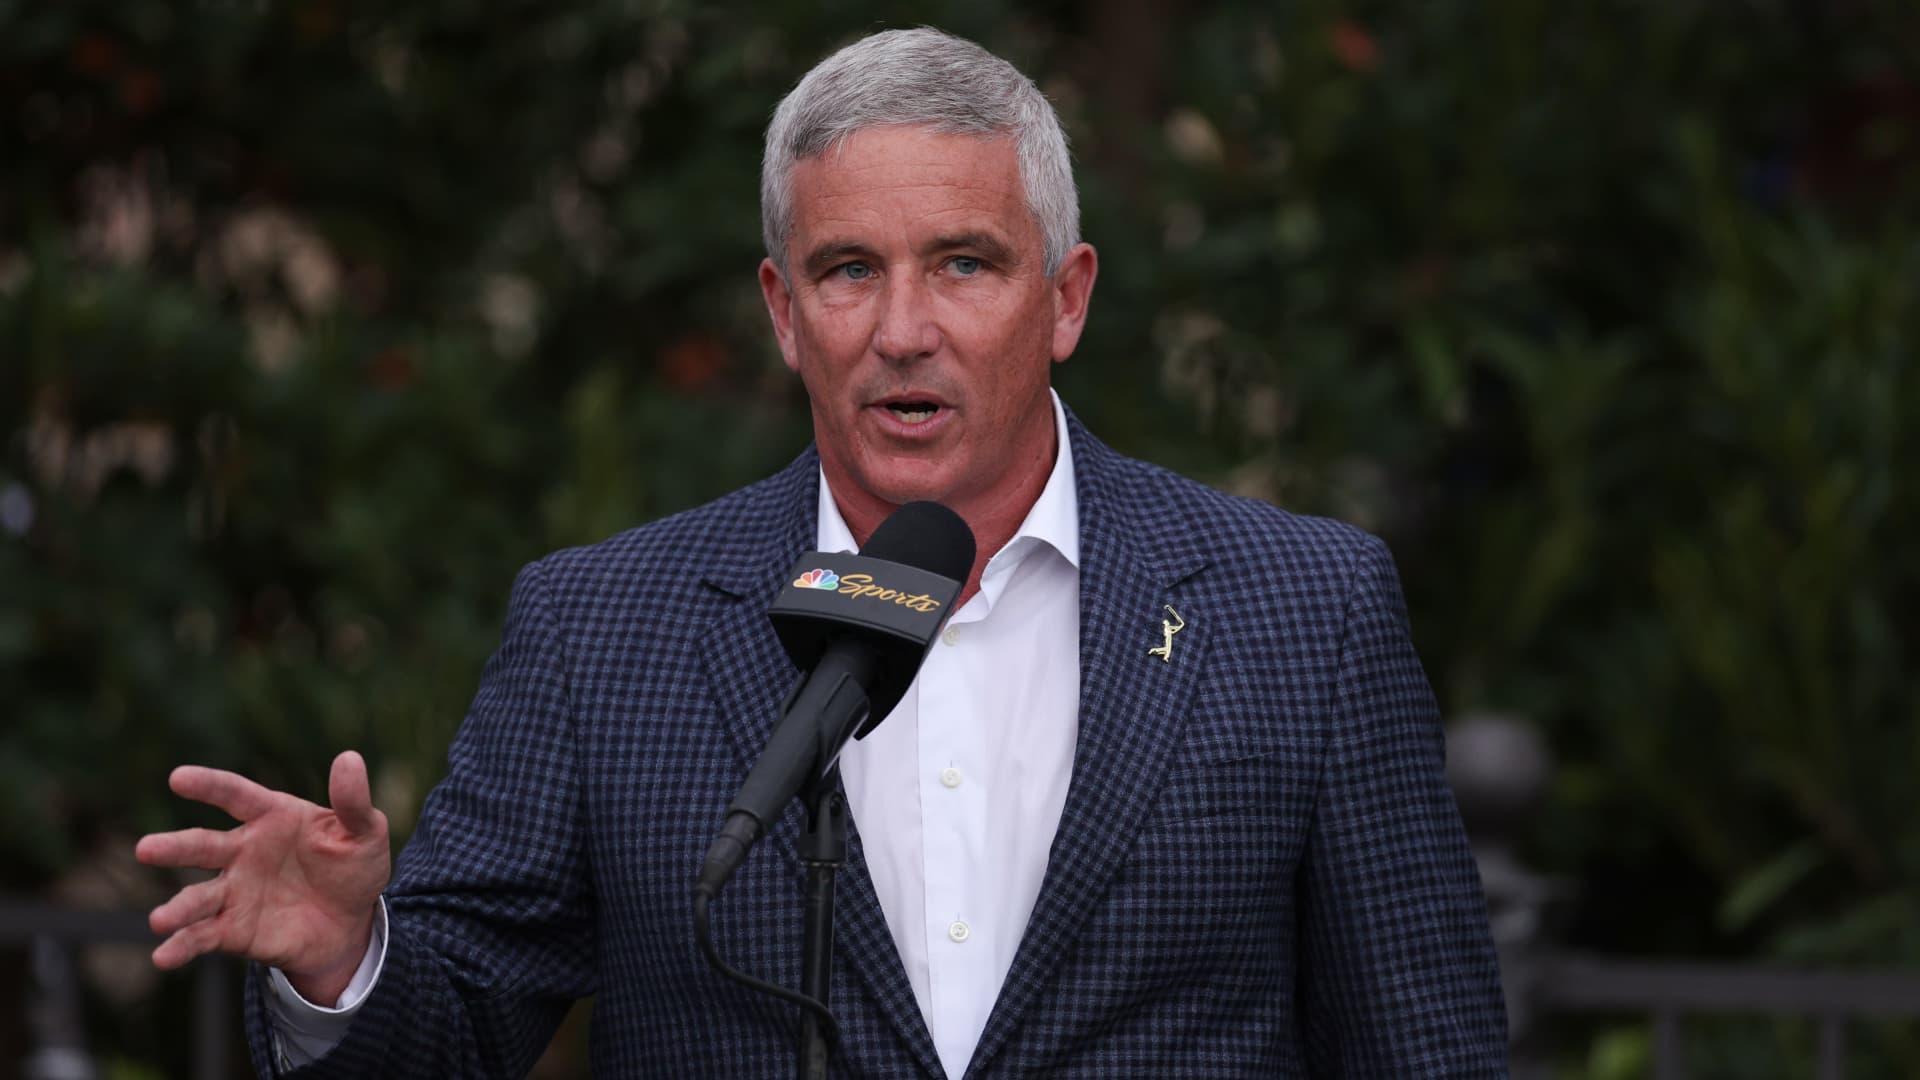 Jay Monahan, PGA TOUR Commissioner, speaks during the trophy ceremony during the final round of THE PLAYERS Championship on THE PLAYERS Stadium Course at TPC Sawgrass on March 12, 2023 in Ponte Vedra Beach, Florida.